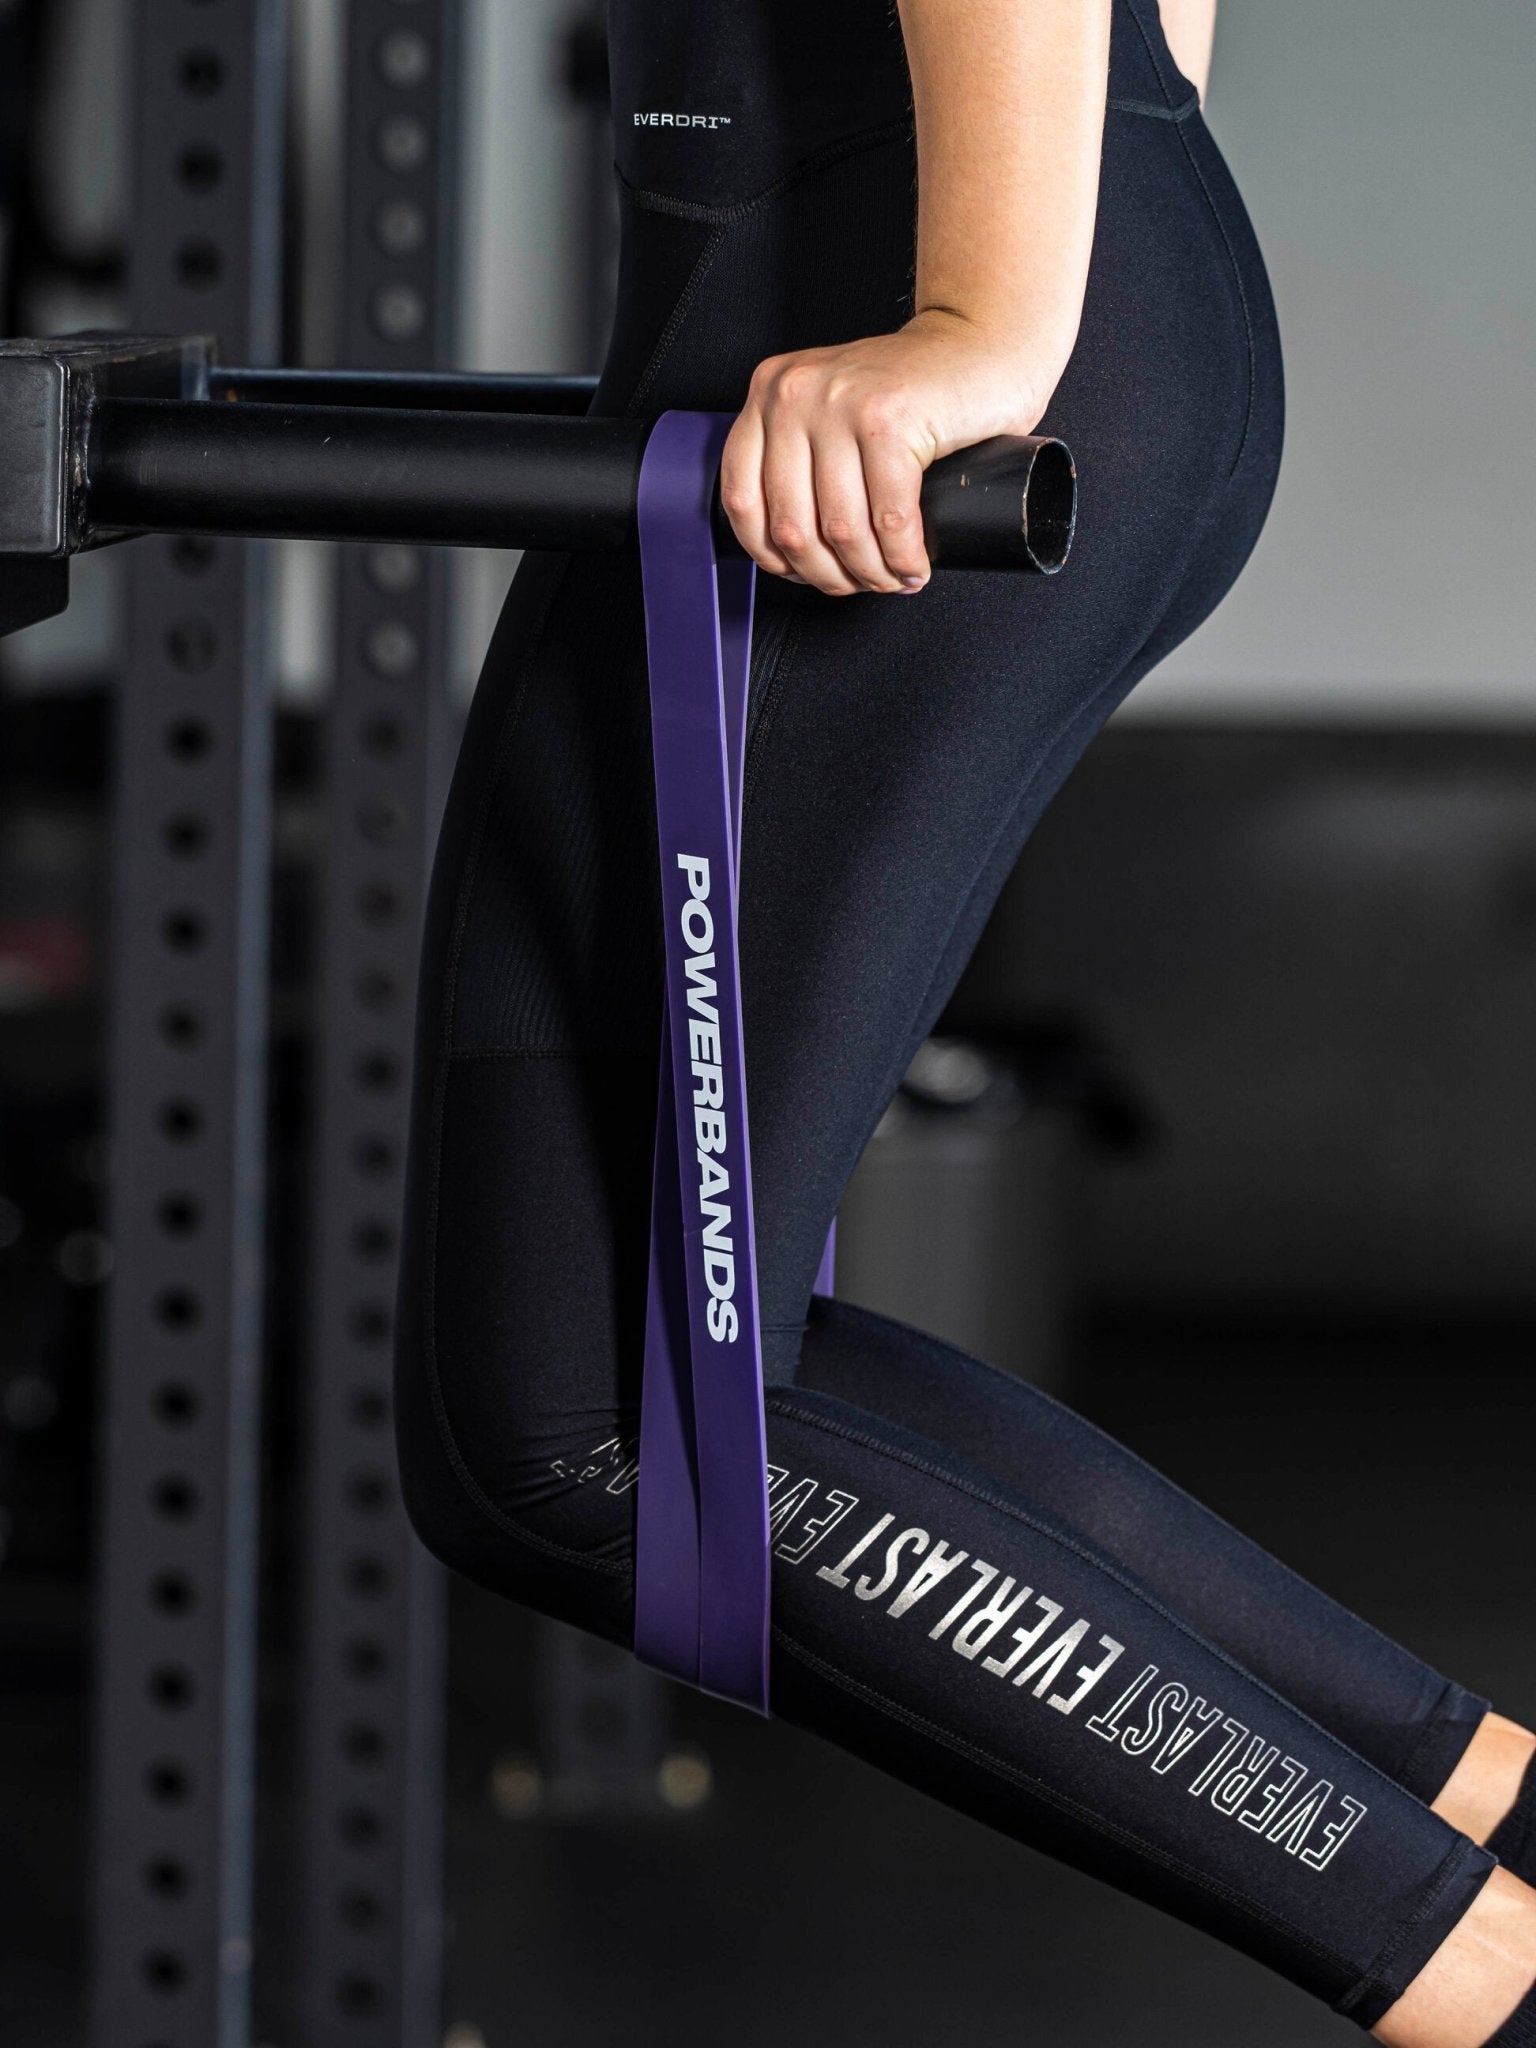 The Home Gym: How to Find the Best Booty Bands in the Market - POWERBANDS®